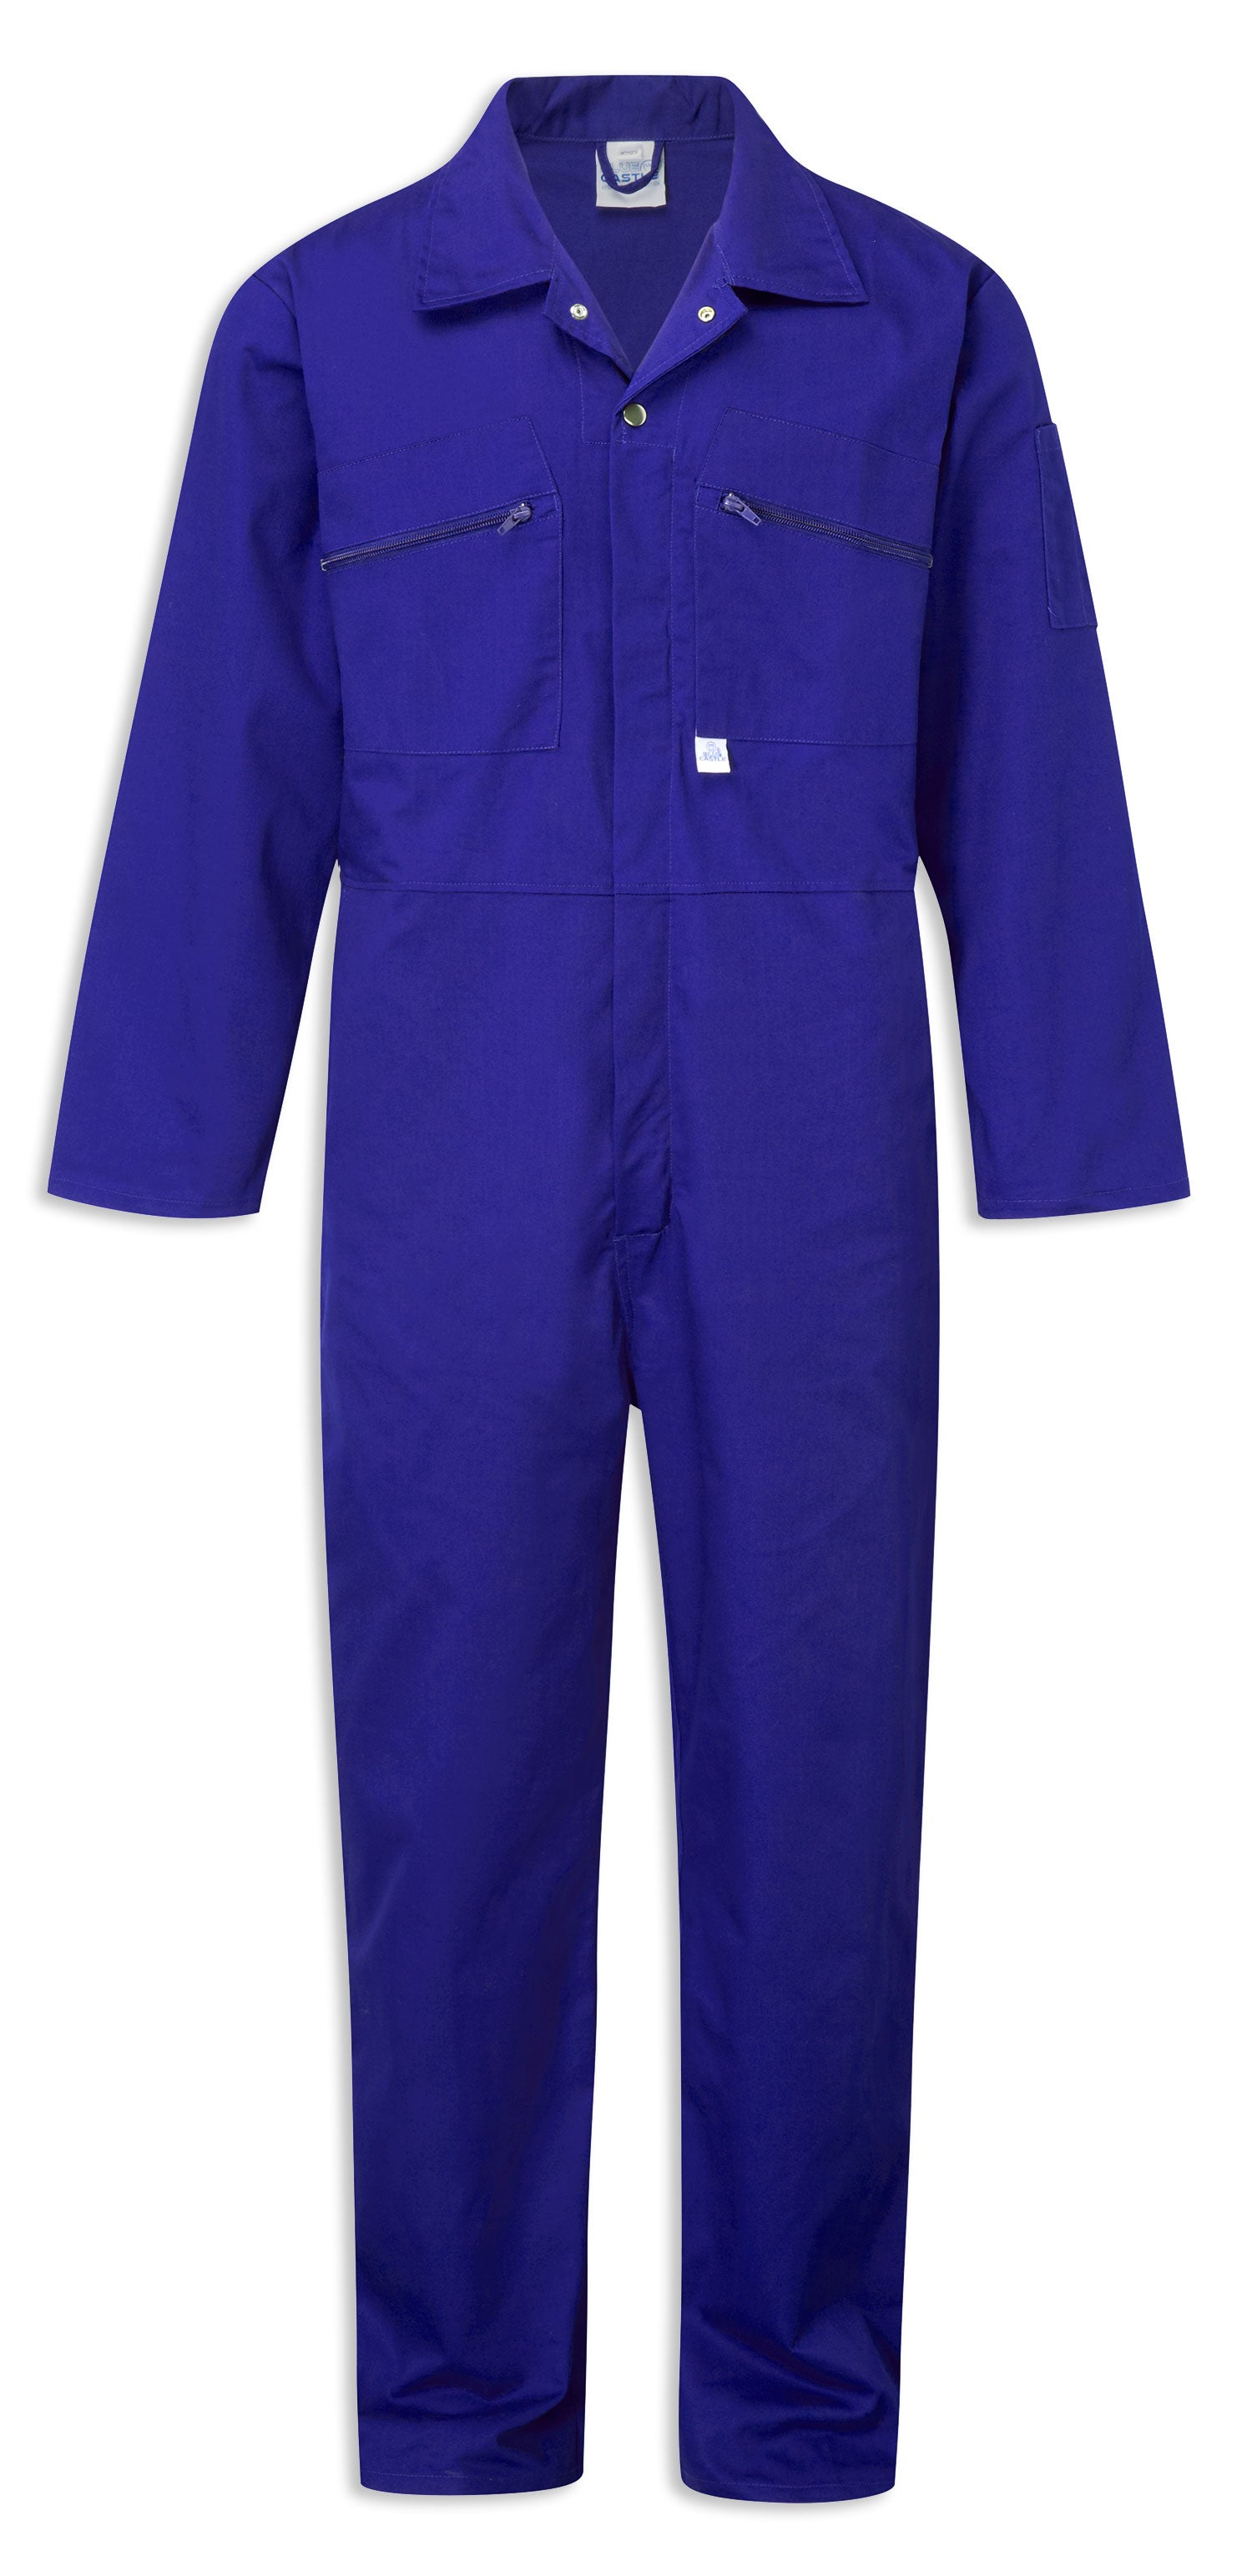 Royal Blue Fort Polycotton Zip Fastening Overalls by Castle